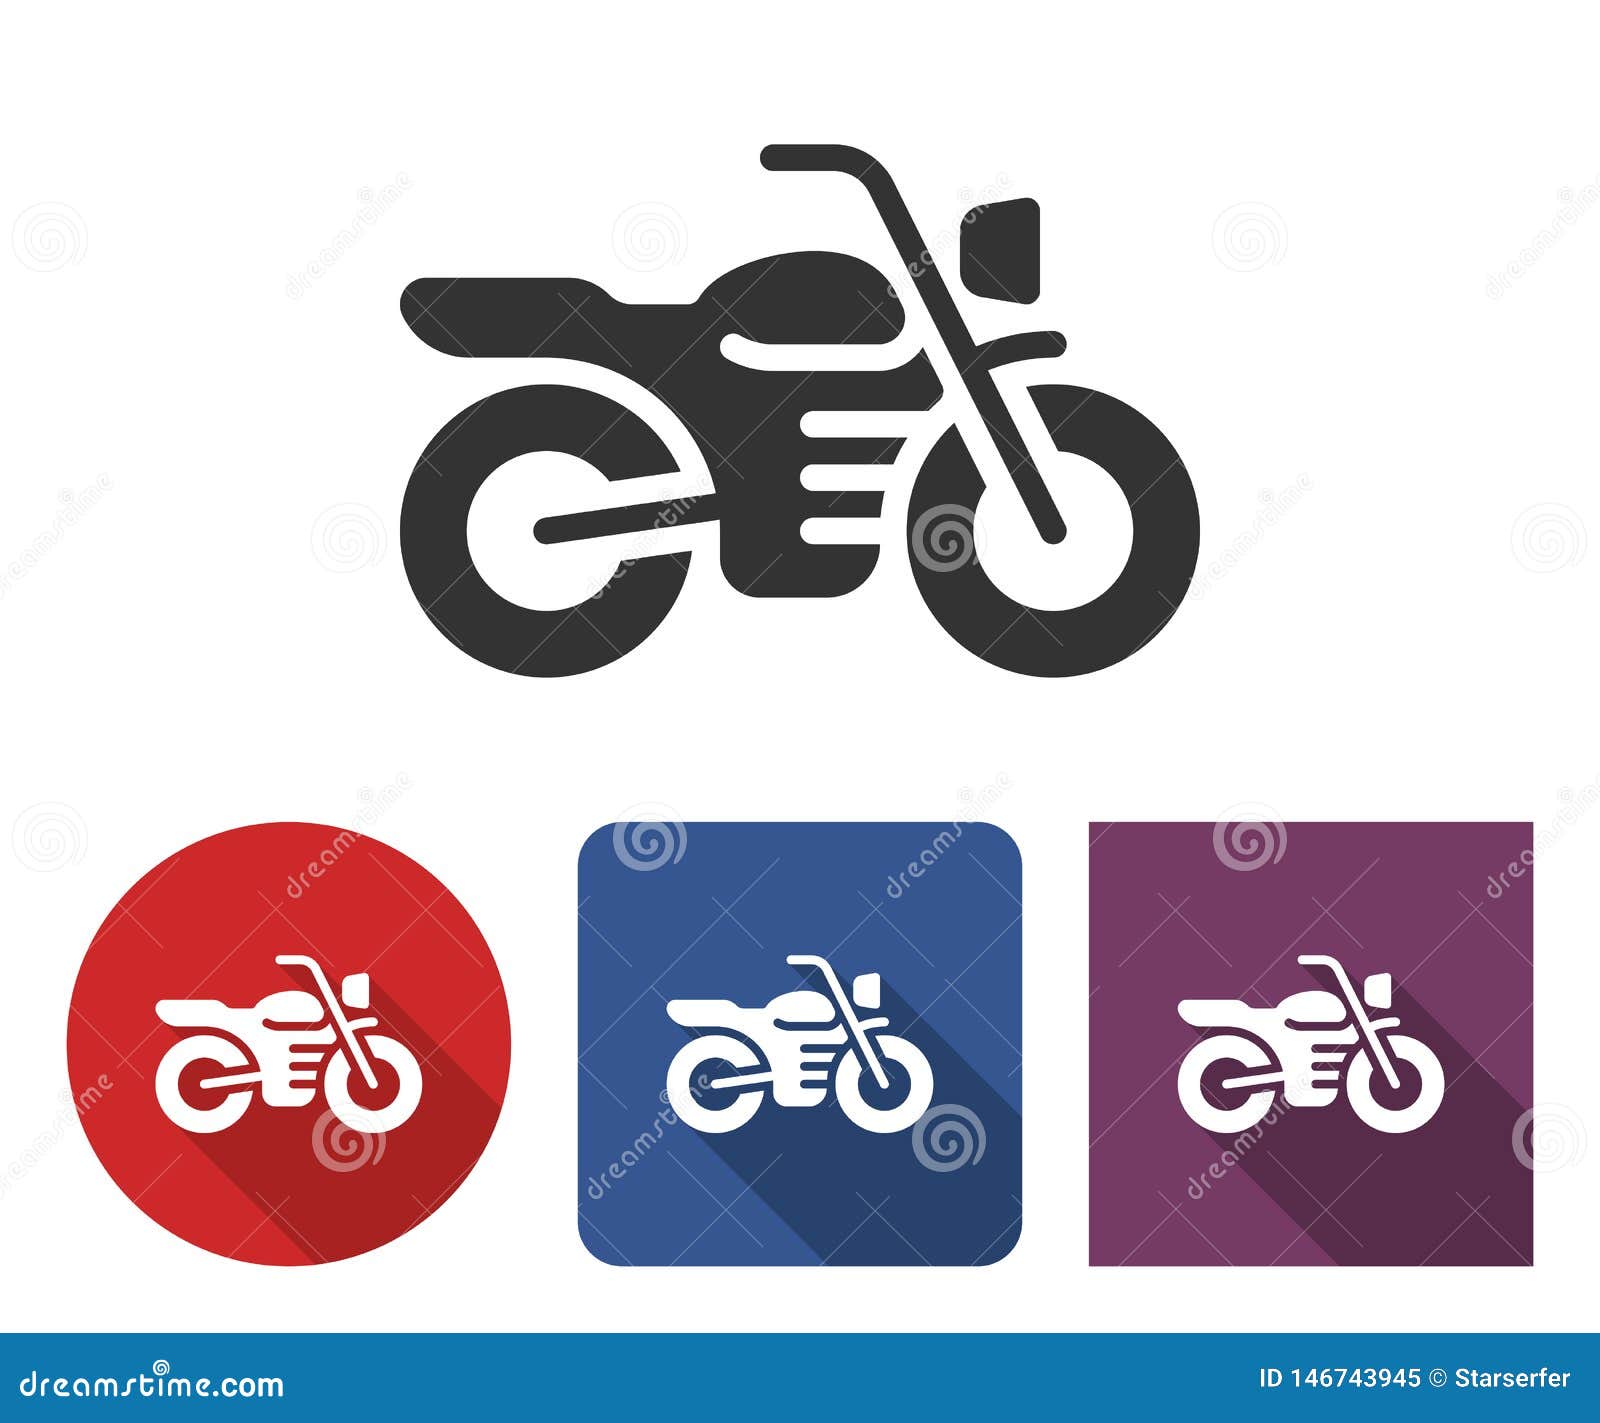 motorcycle icon in different variants